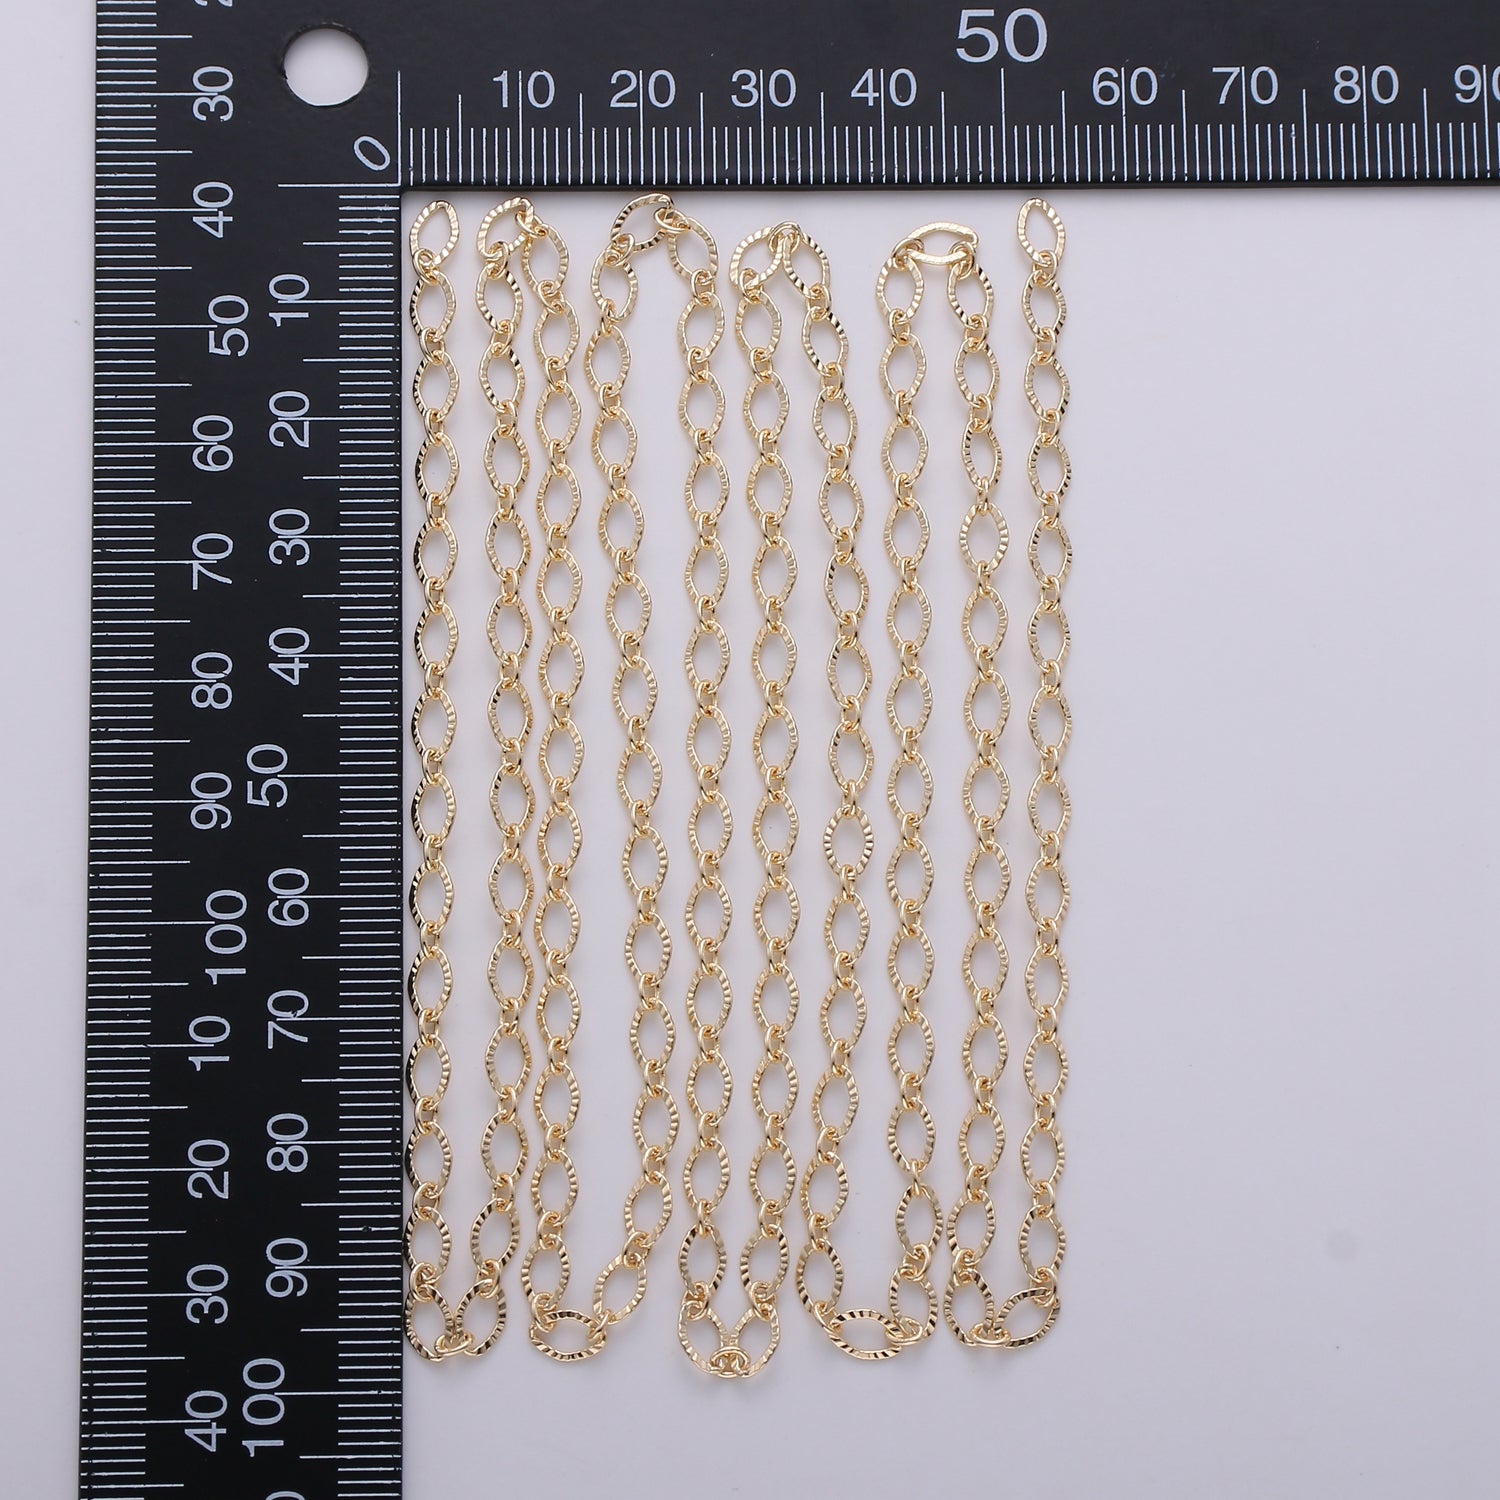 16K Gold Filled Oval Rolo Chain by Yard, Gold Filled Oval Link Chain, Wholesale bulk Roll Chain for Jewelry Making, Width 4.2mm #262 - DLUXCA